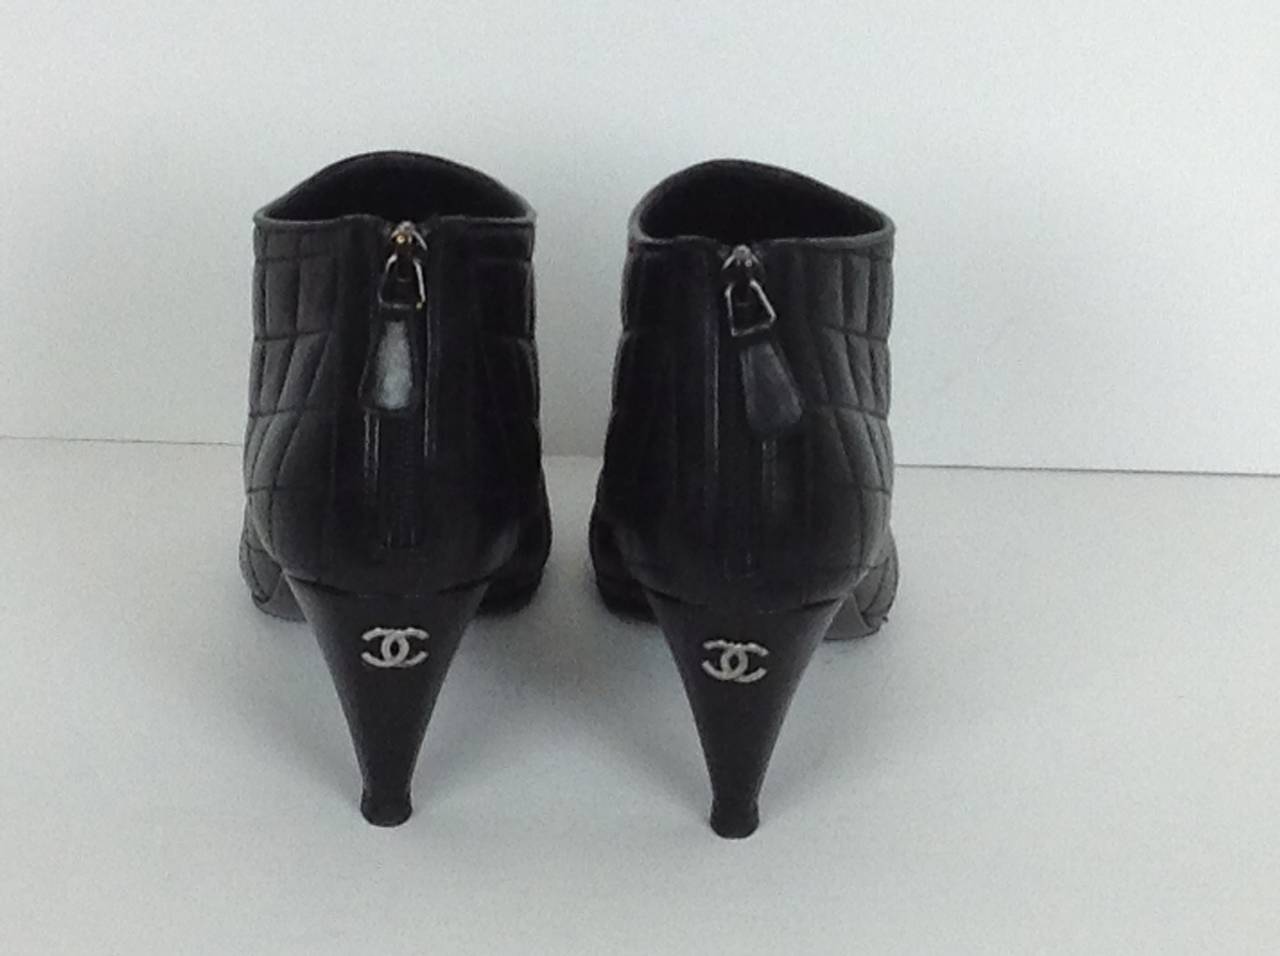 Black Chanel quilted bootie with classic cap toe, from Fall 2014!
3